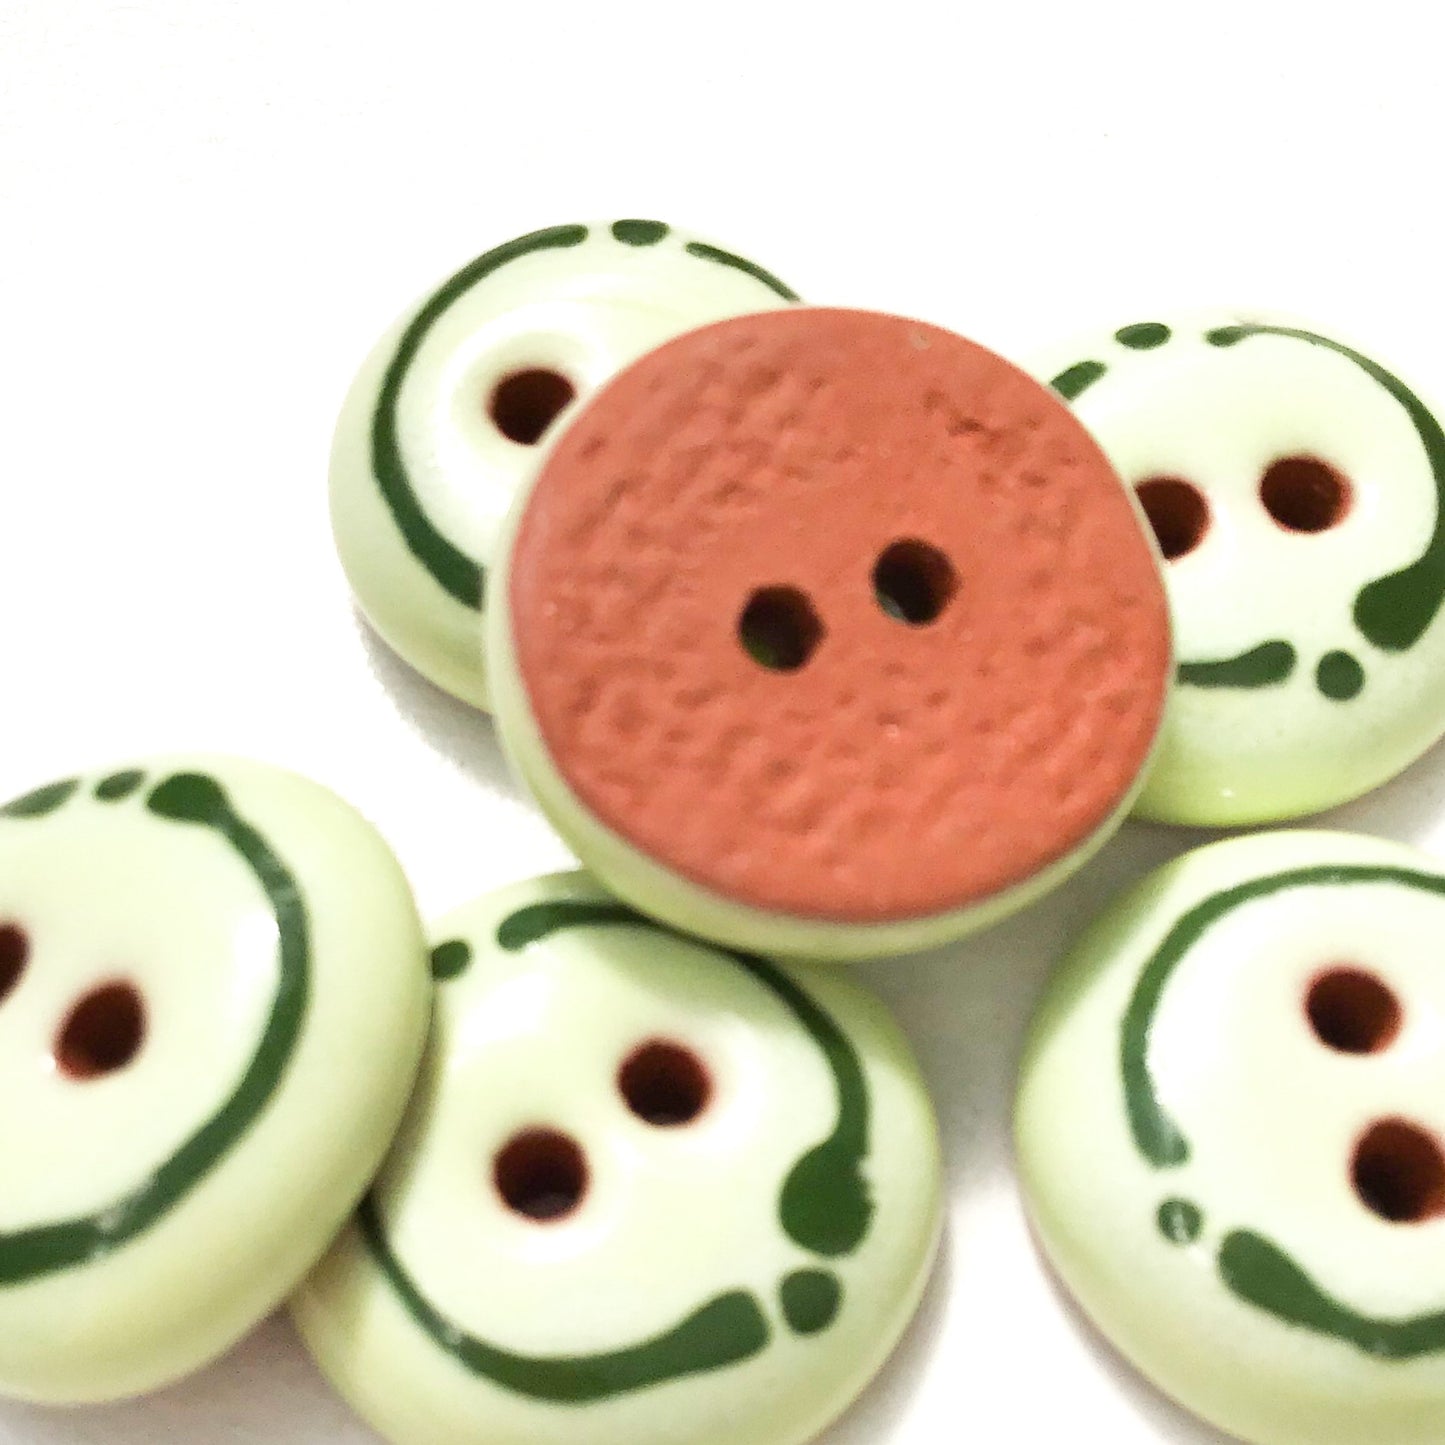 Honeydew Green Ceramic Buttons - Rounded Ceramic Buttons - 5/8" - 6 Pack